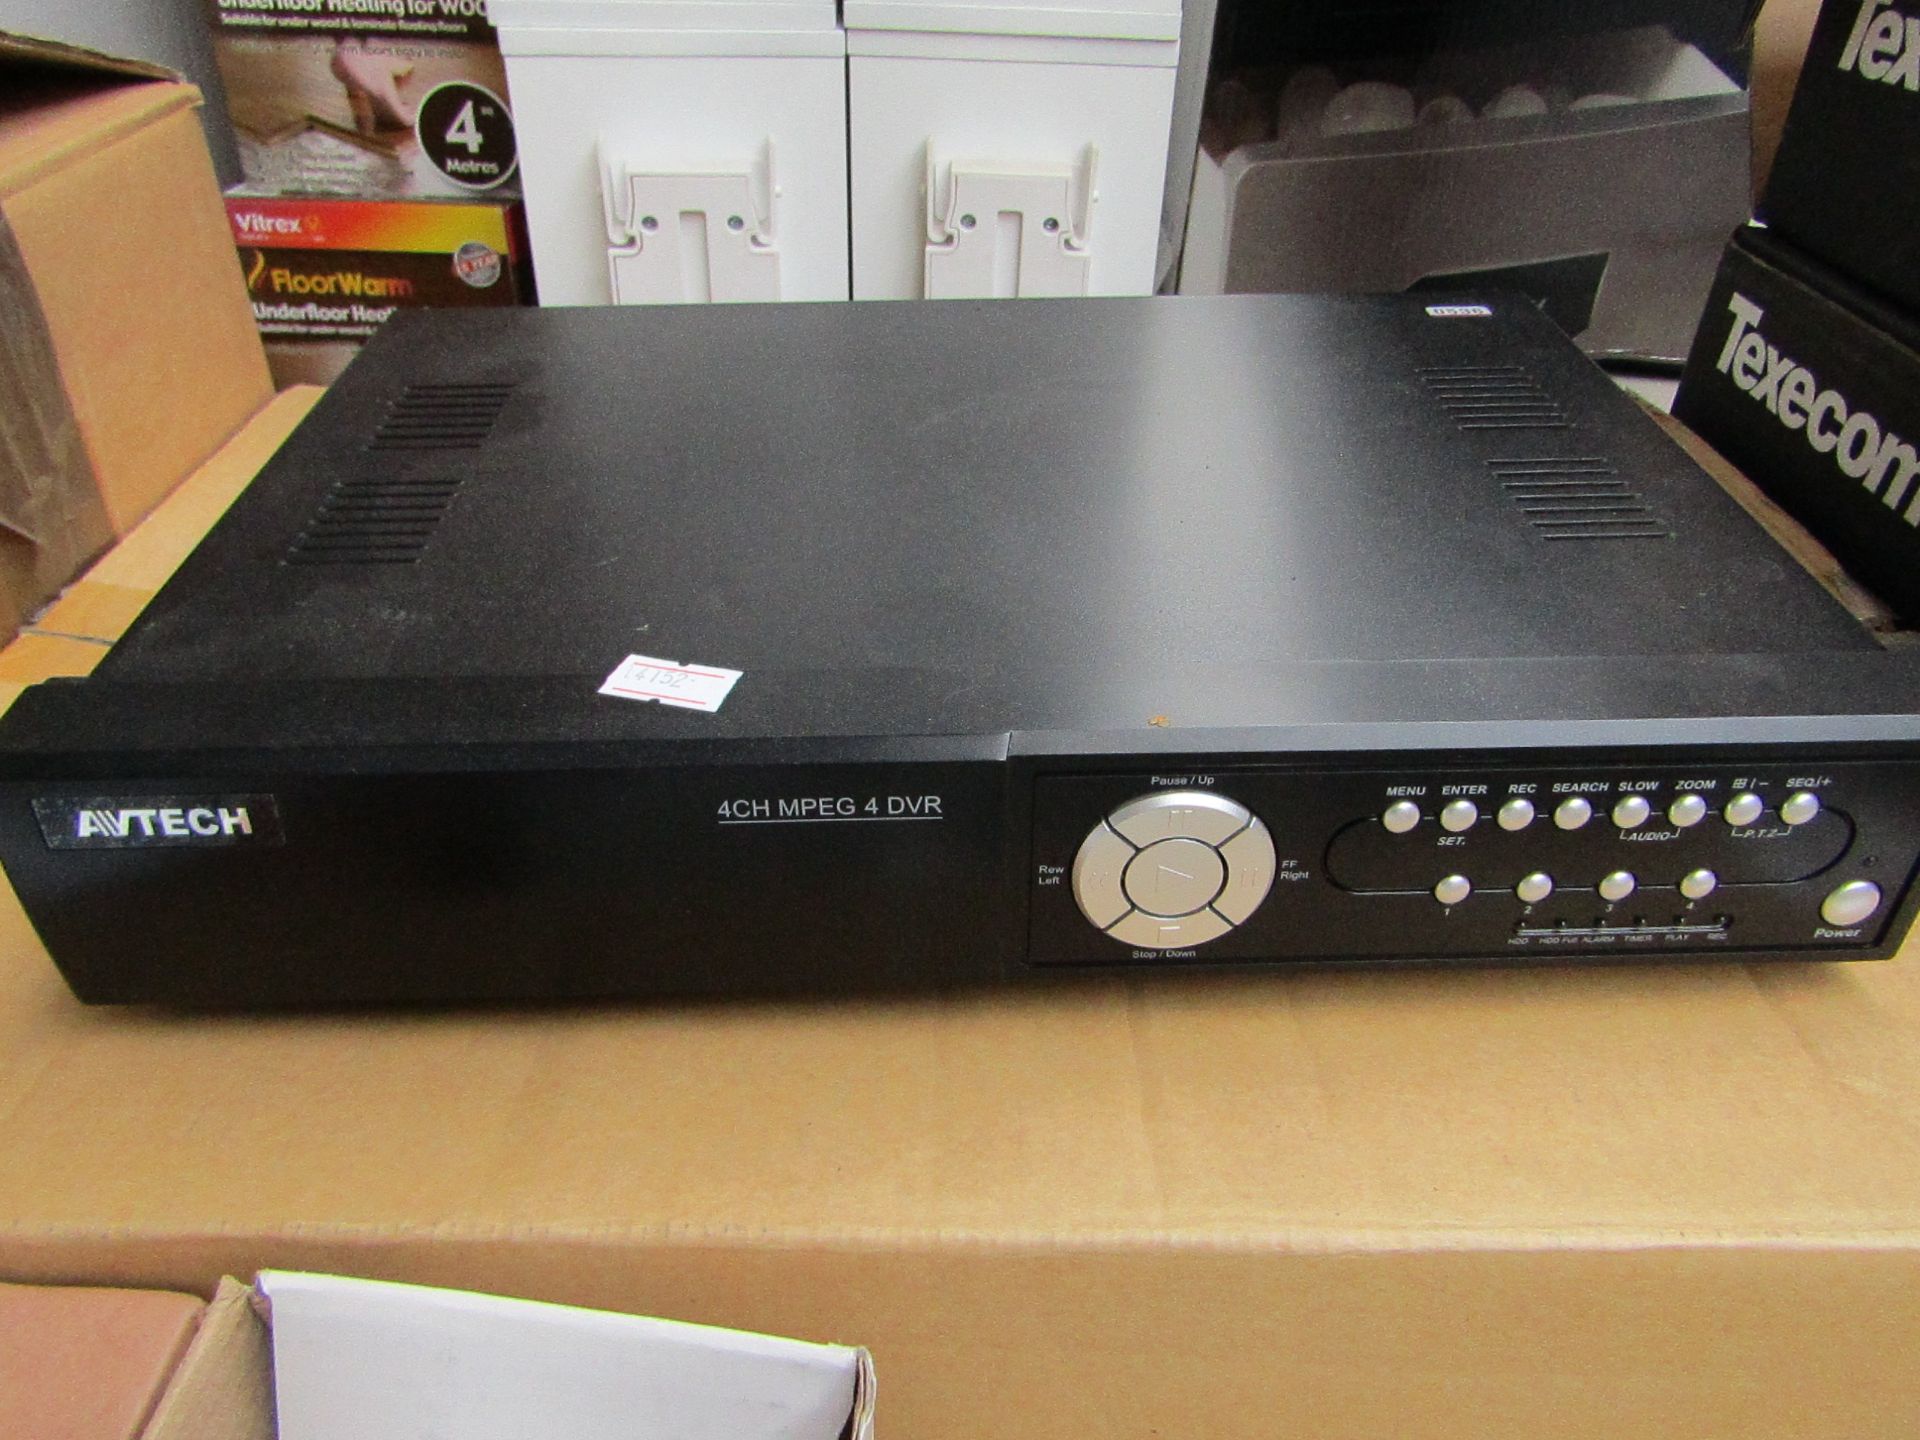 Avtech - 4" MPEG 4 DVR - Untested & Boxed.